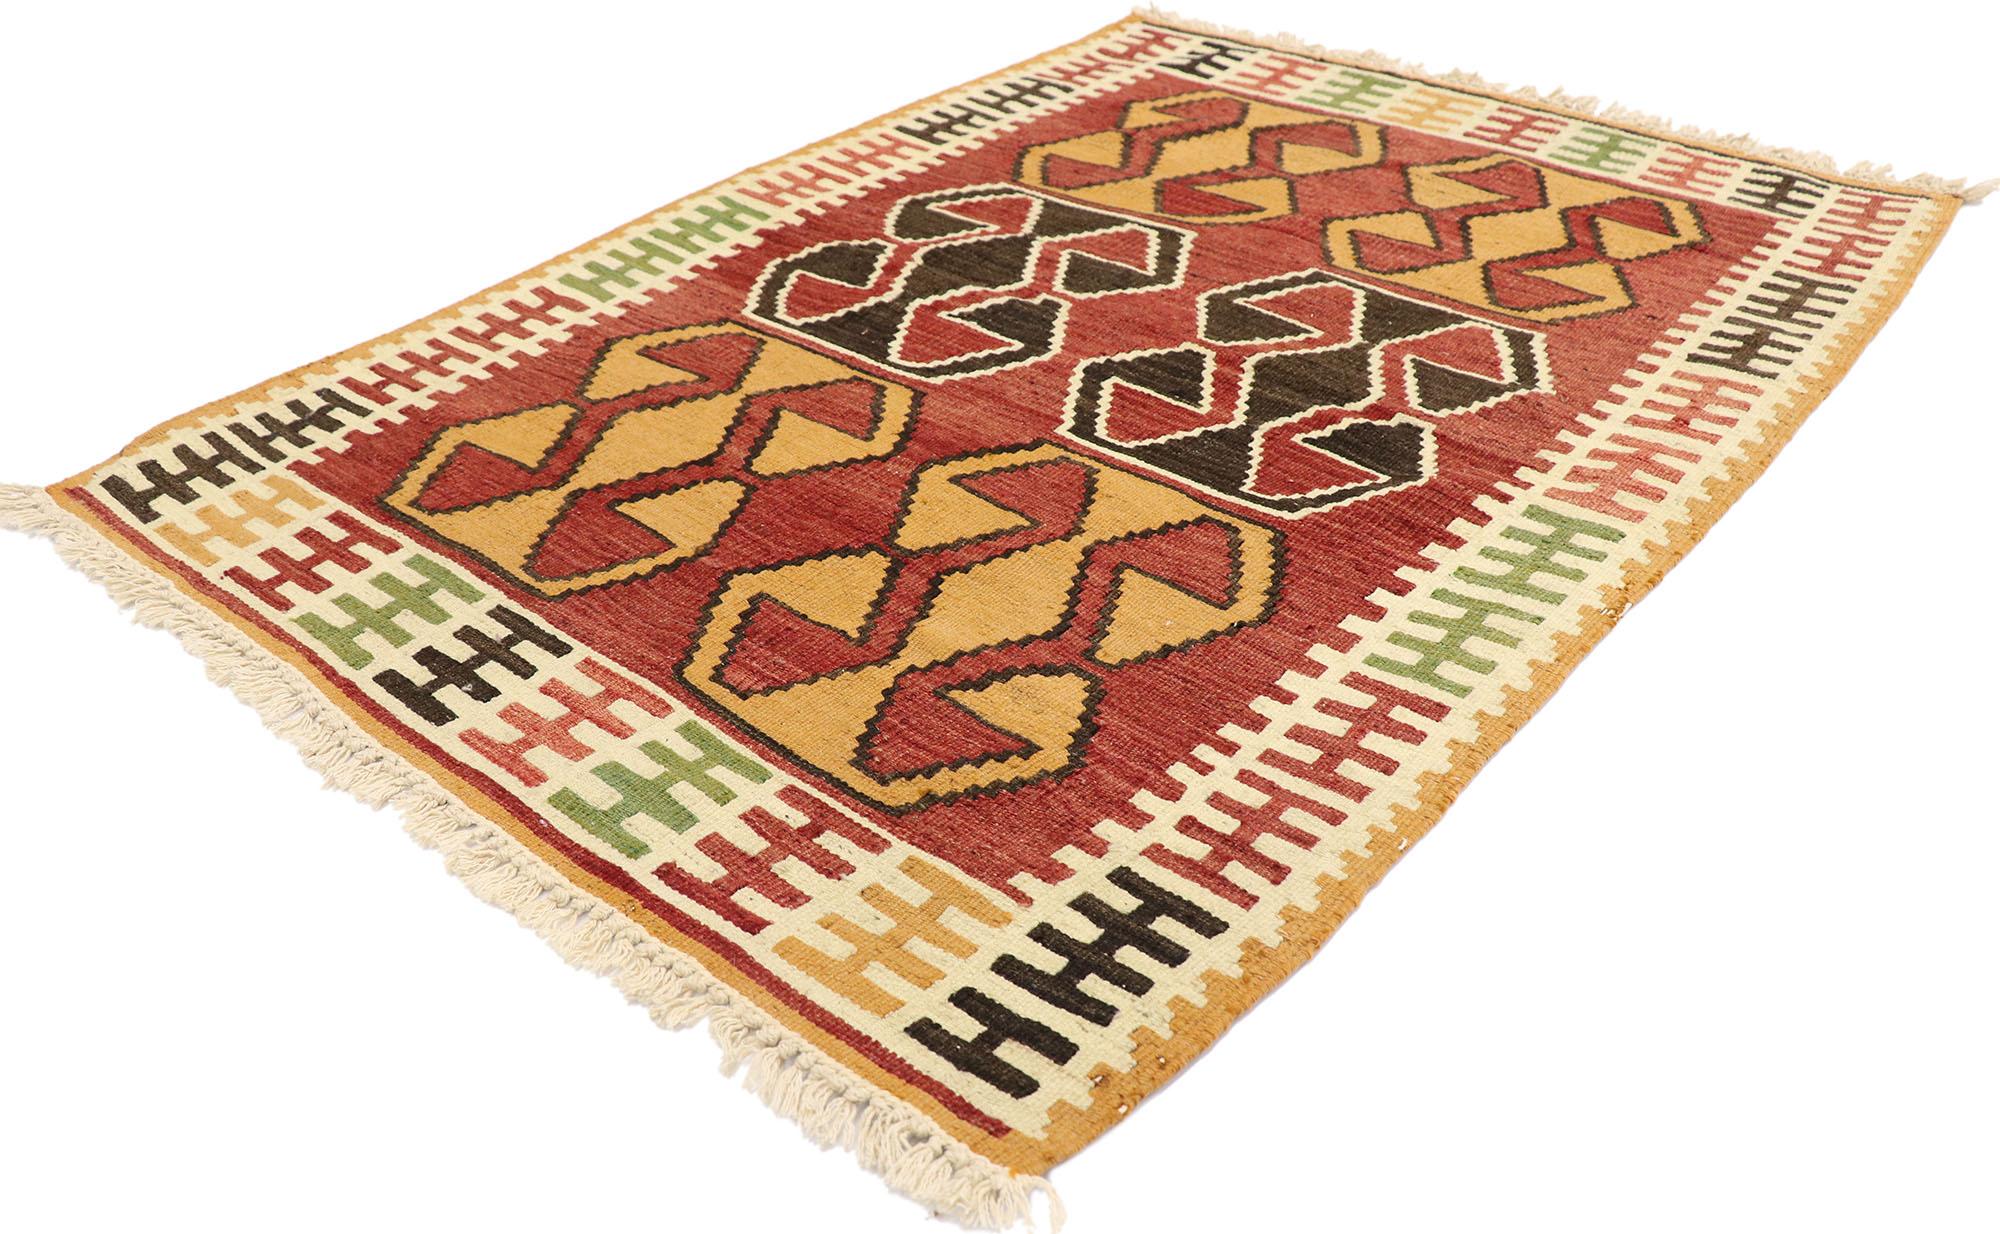 77950 Vintage Persian Shiraz Kilim Rug with Tribal Style 02'10 x 03'11. Full of tiny details and a bold expressive design combined with warm colors and tribal style, this hand-woven wool vintage Persian Shiraz kilim rug is a captivating vision of